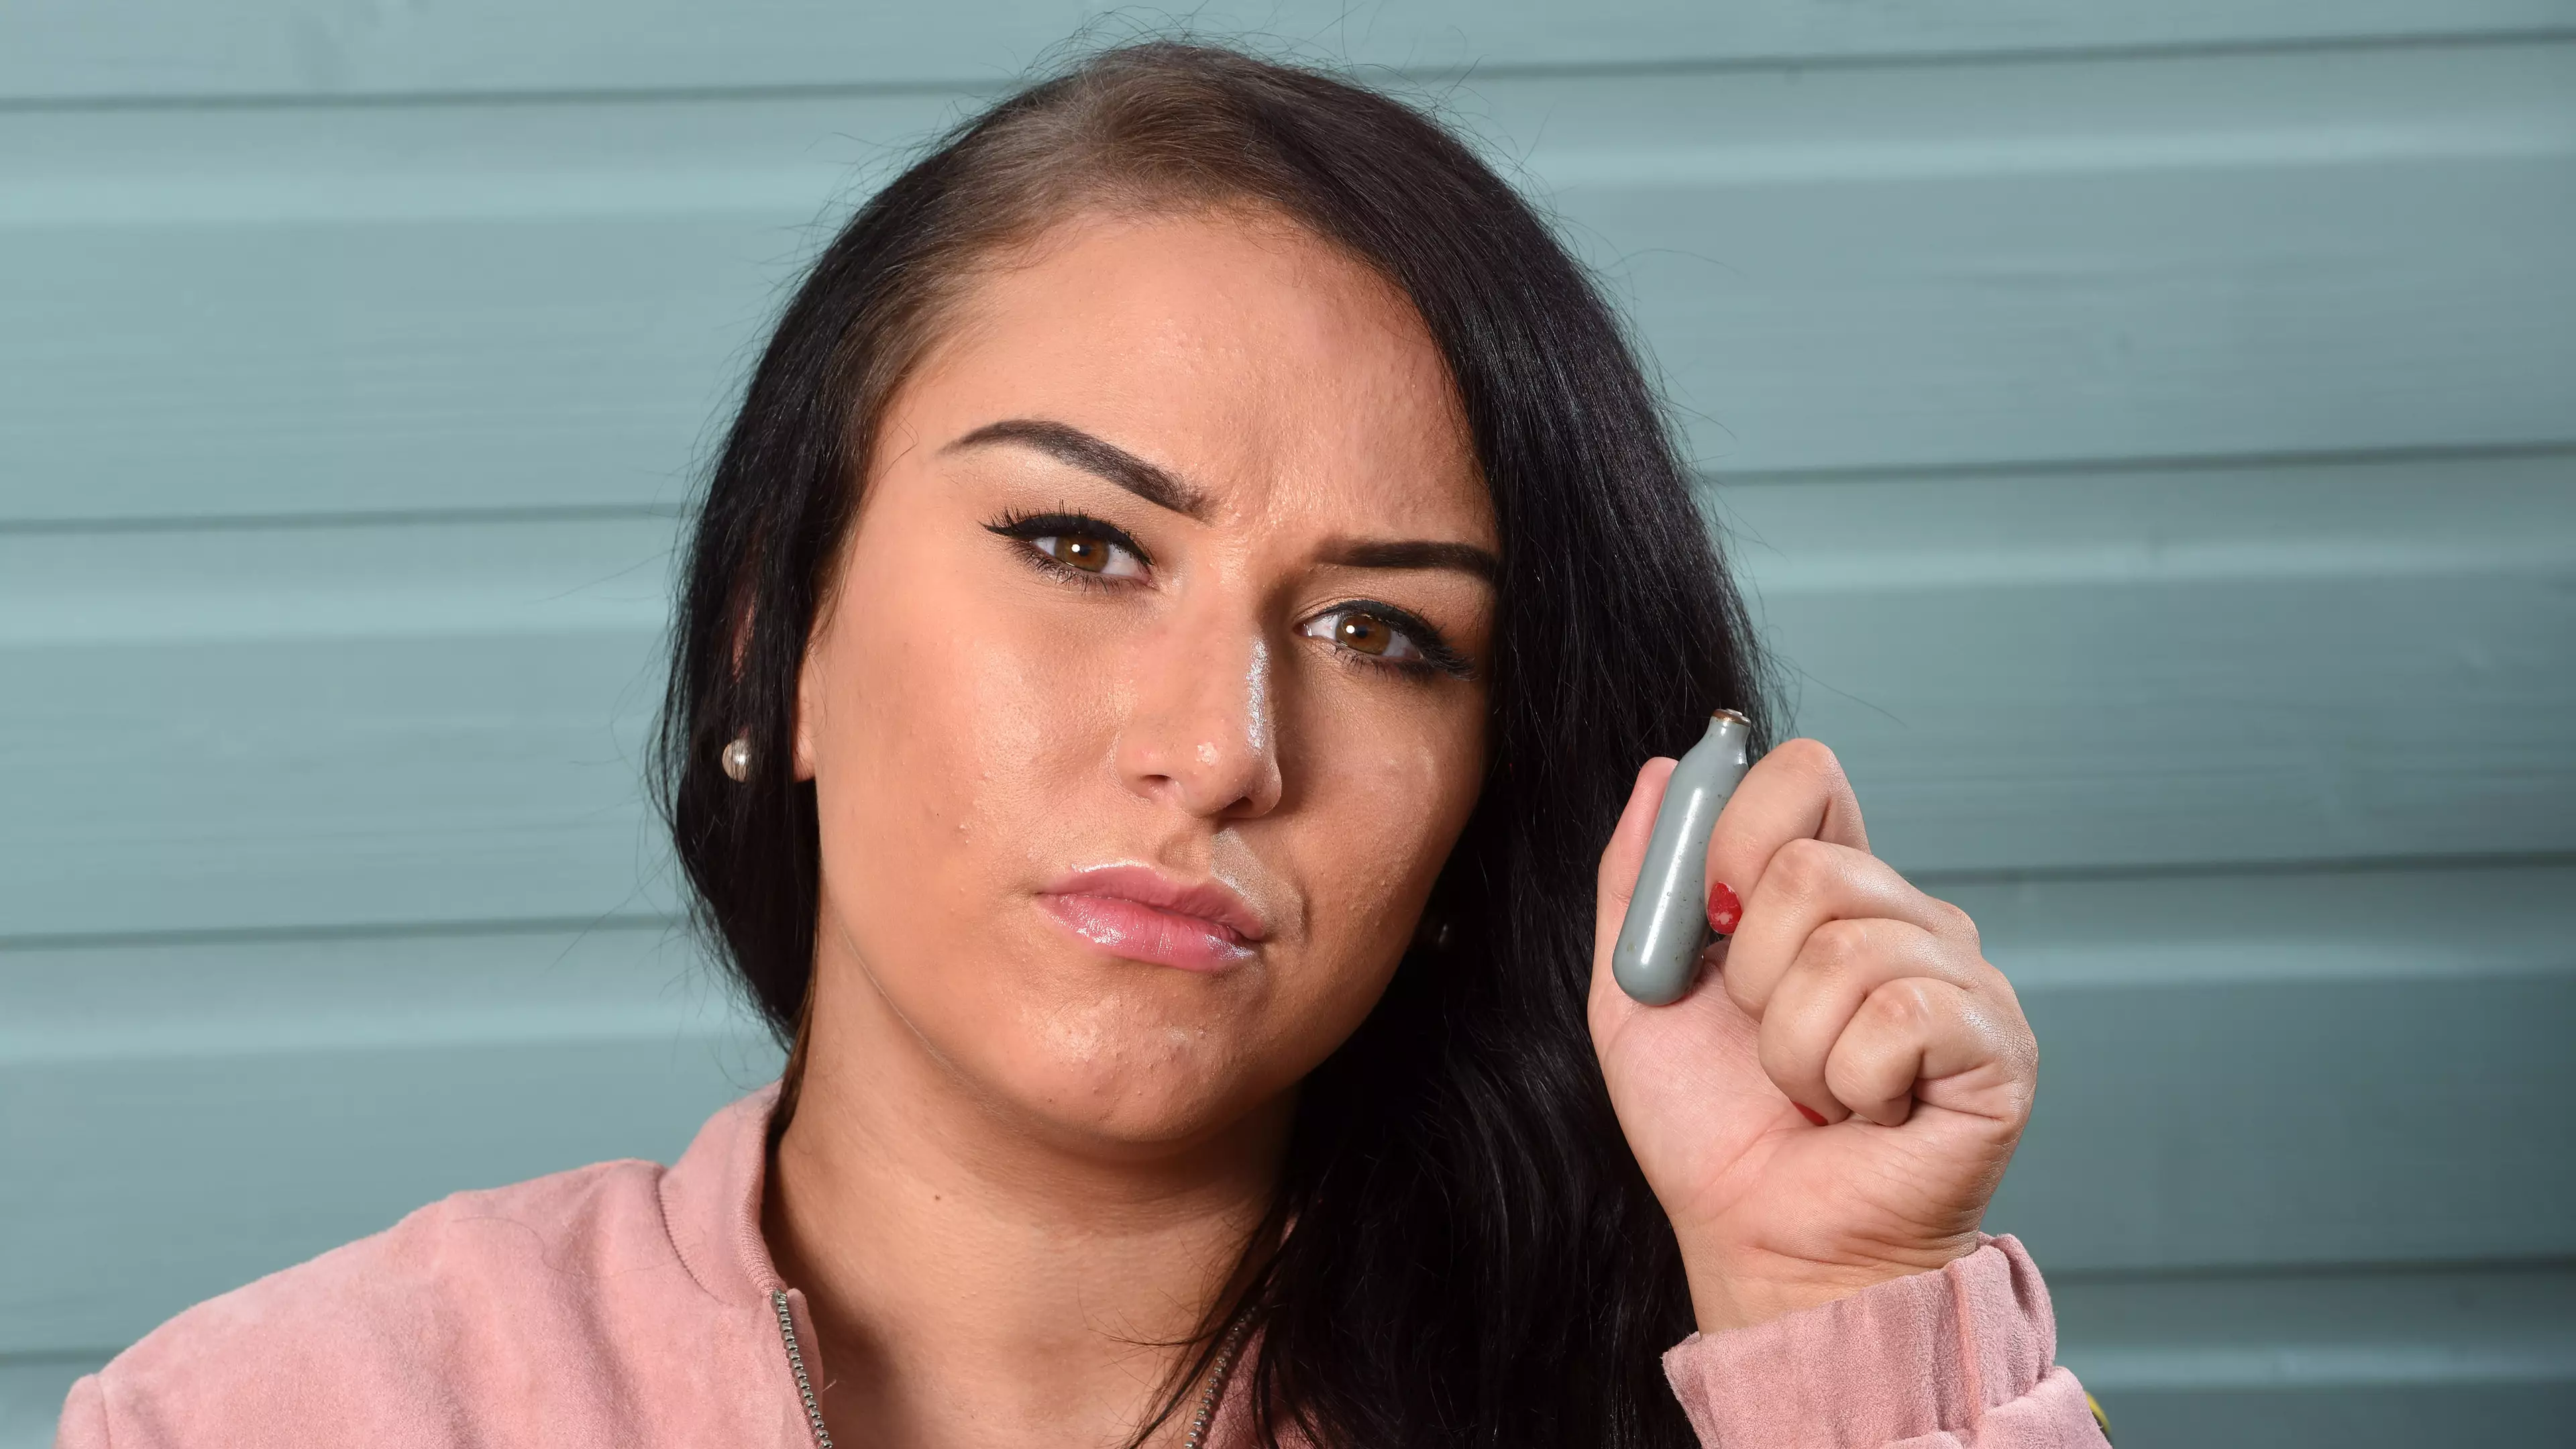 Young Mum Warns Of Dangers Of Nitrous Oxide After Drug Left Her Paralysed